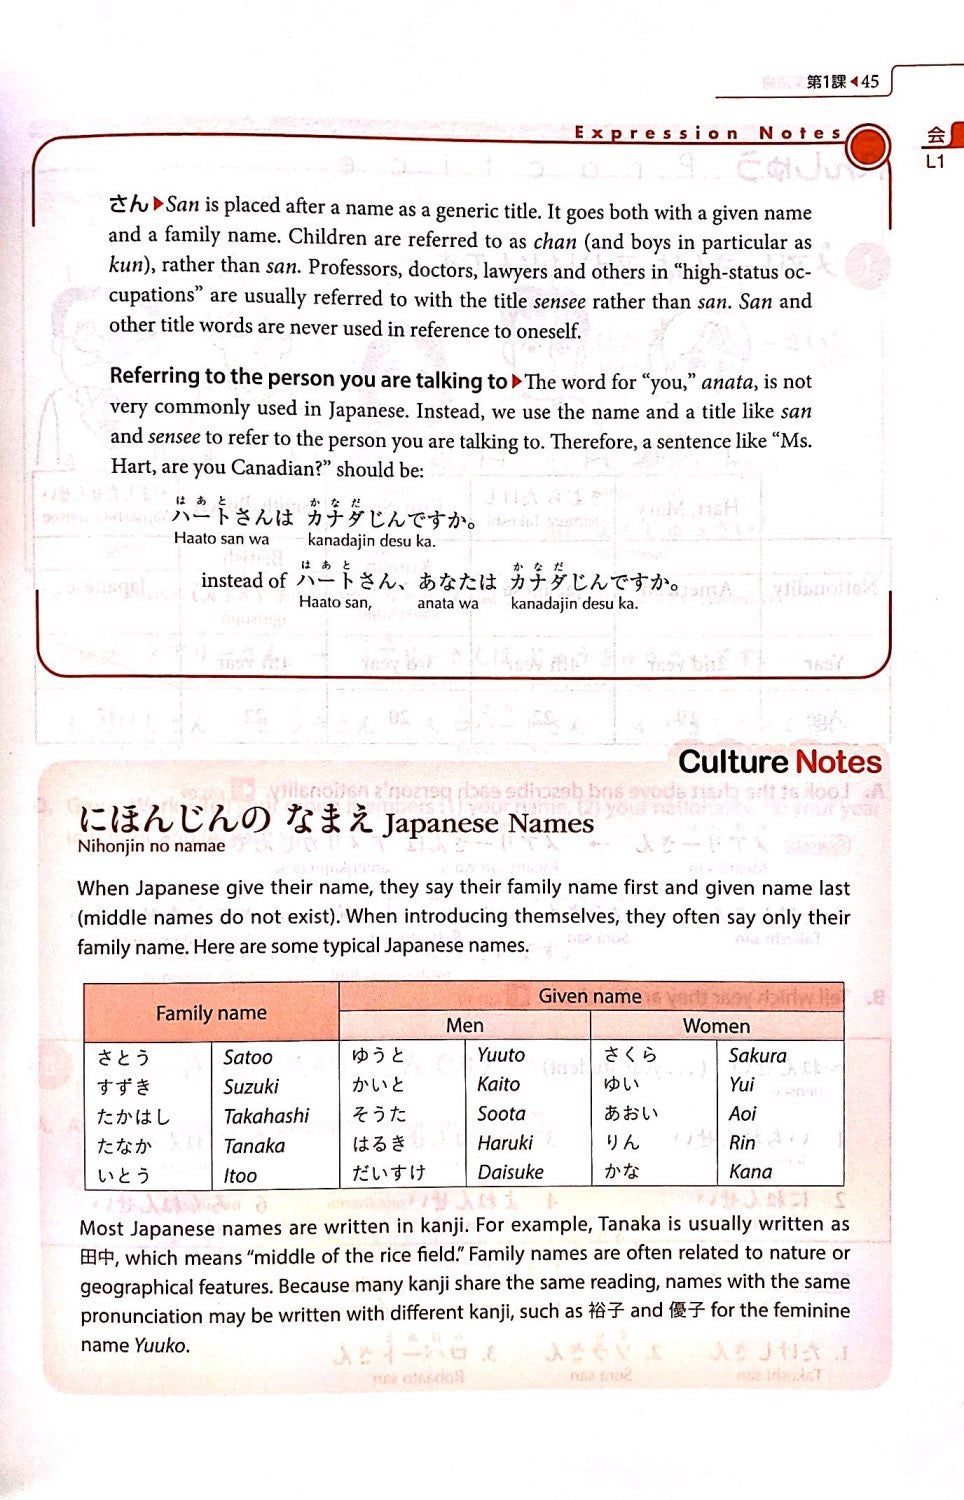 Textbook for learning Japanese